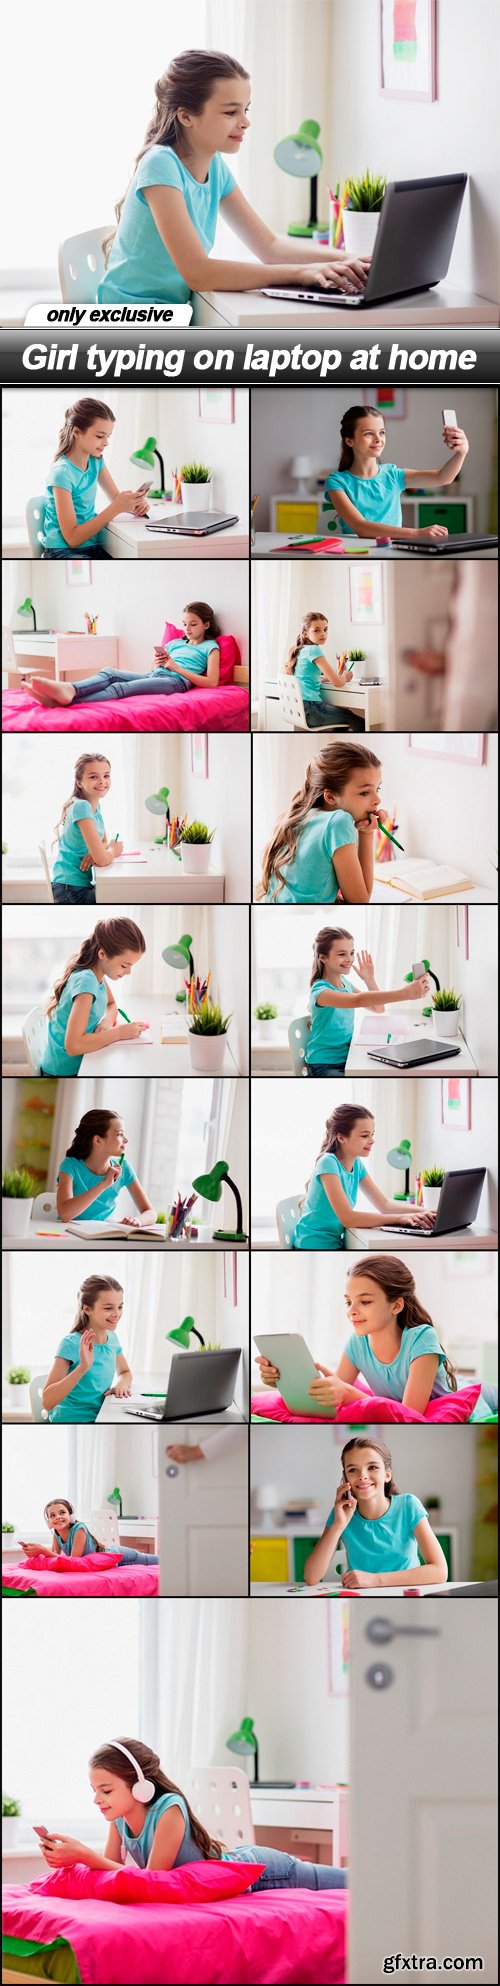 Girl typing on laptop at home - 15 UHQ JPEG